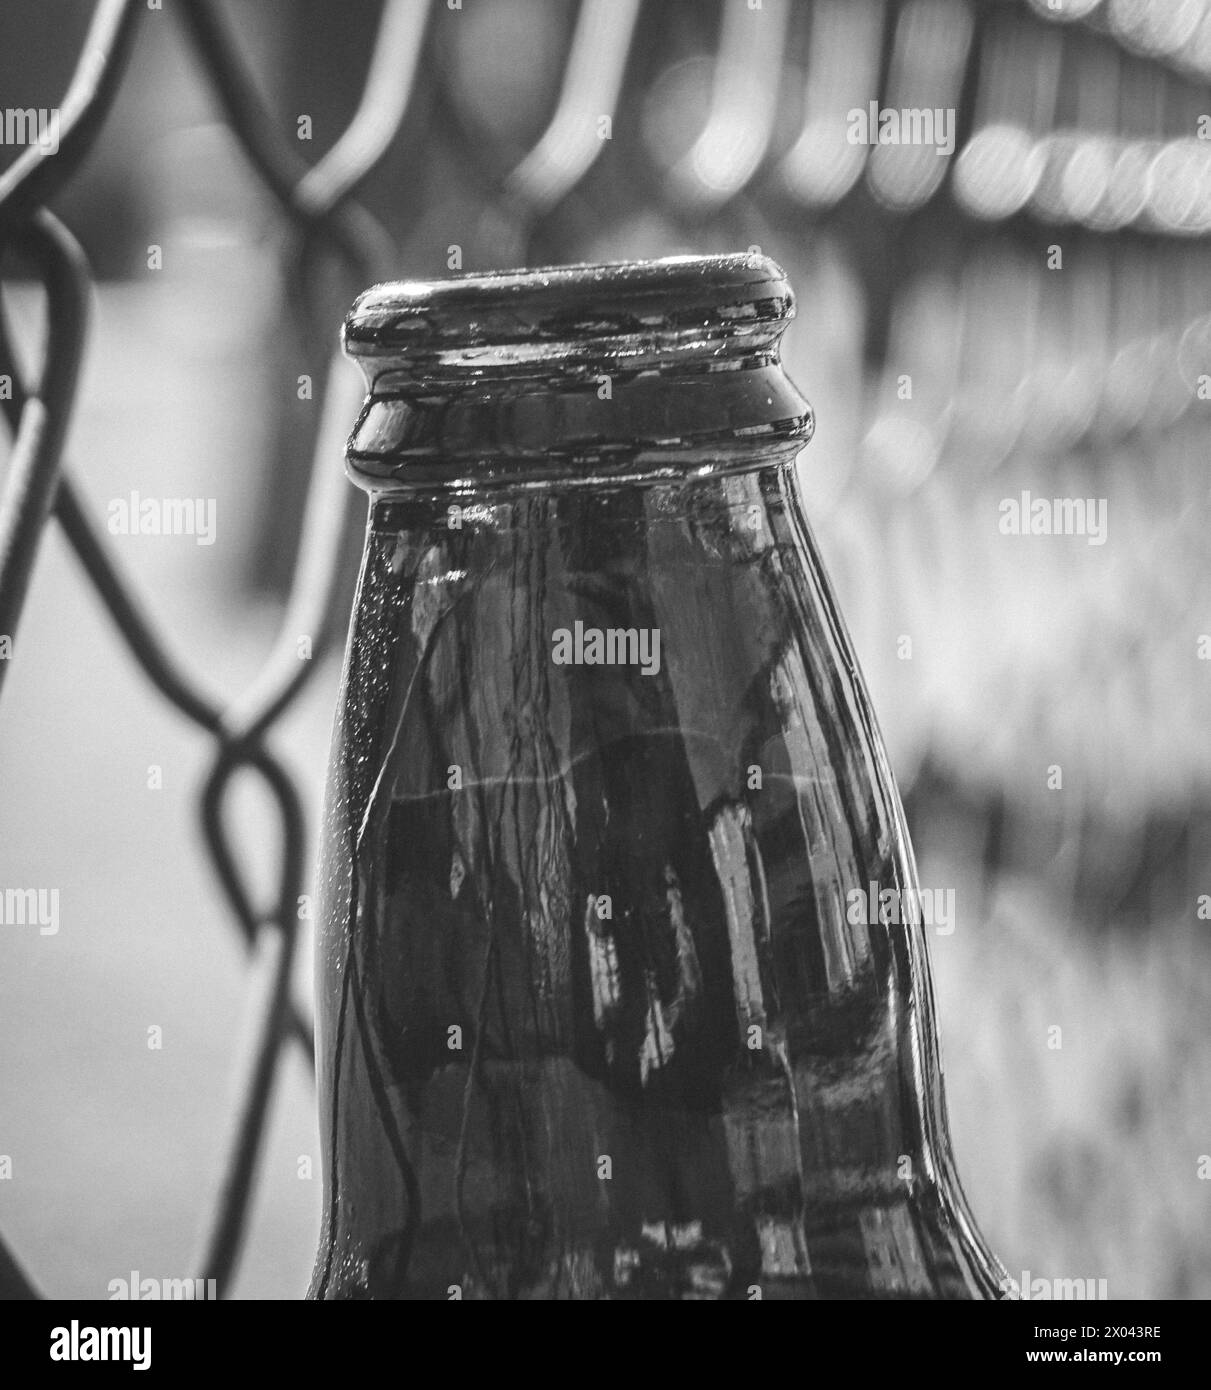 Close up of a bottle in black and white Stock Photo